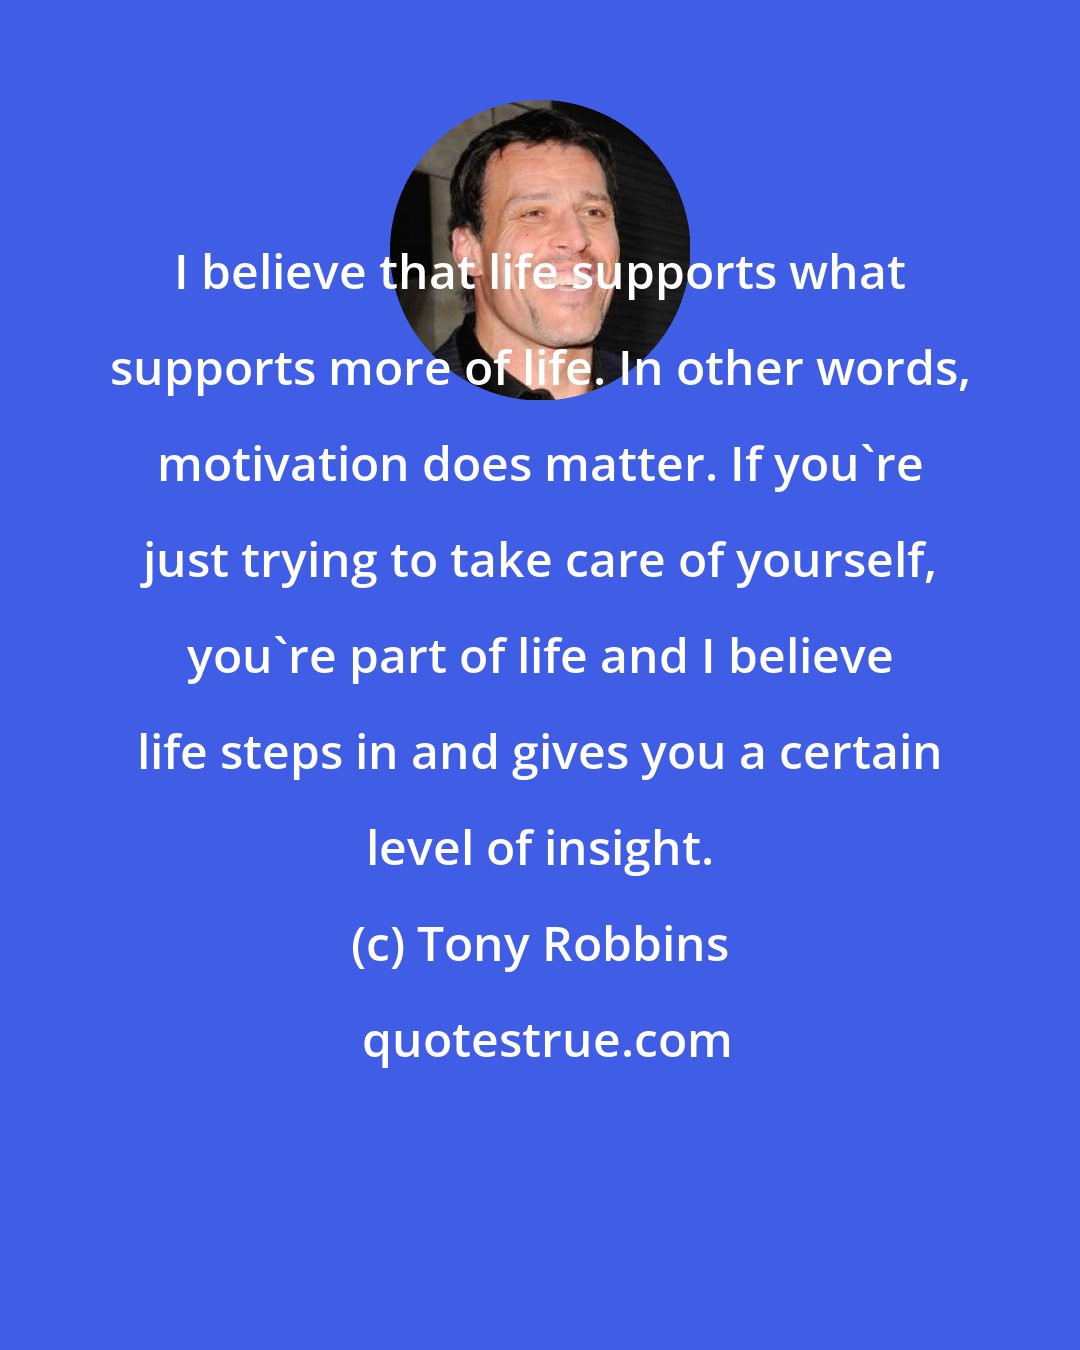 Tony Robbins: I believe that life supports what supports more of life. In other words, motivation does matter. If you're just trying to take care of yourself, you're part of life and I believe life steps in and gives you a certain level of insight.